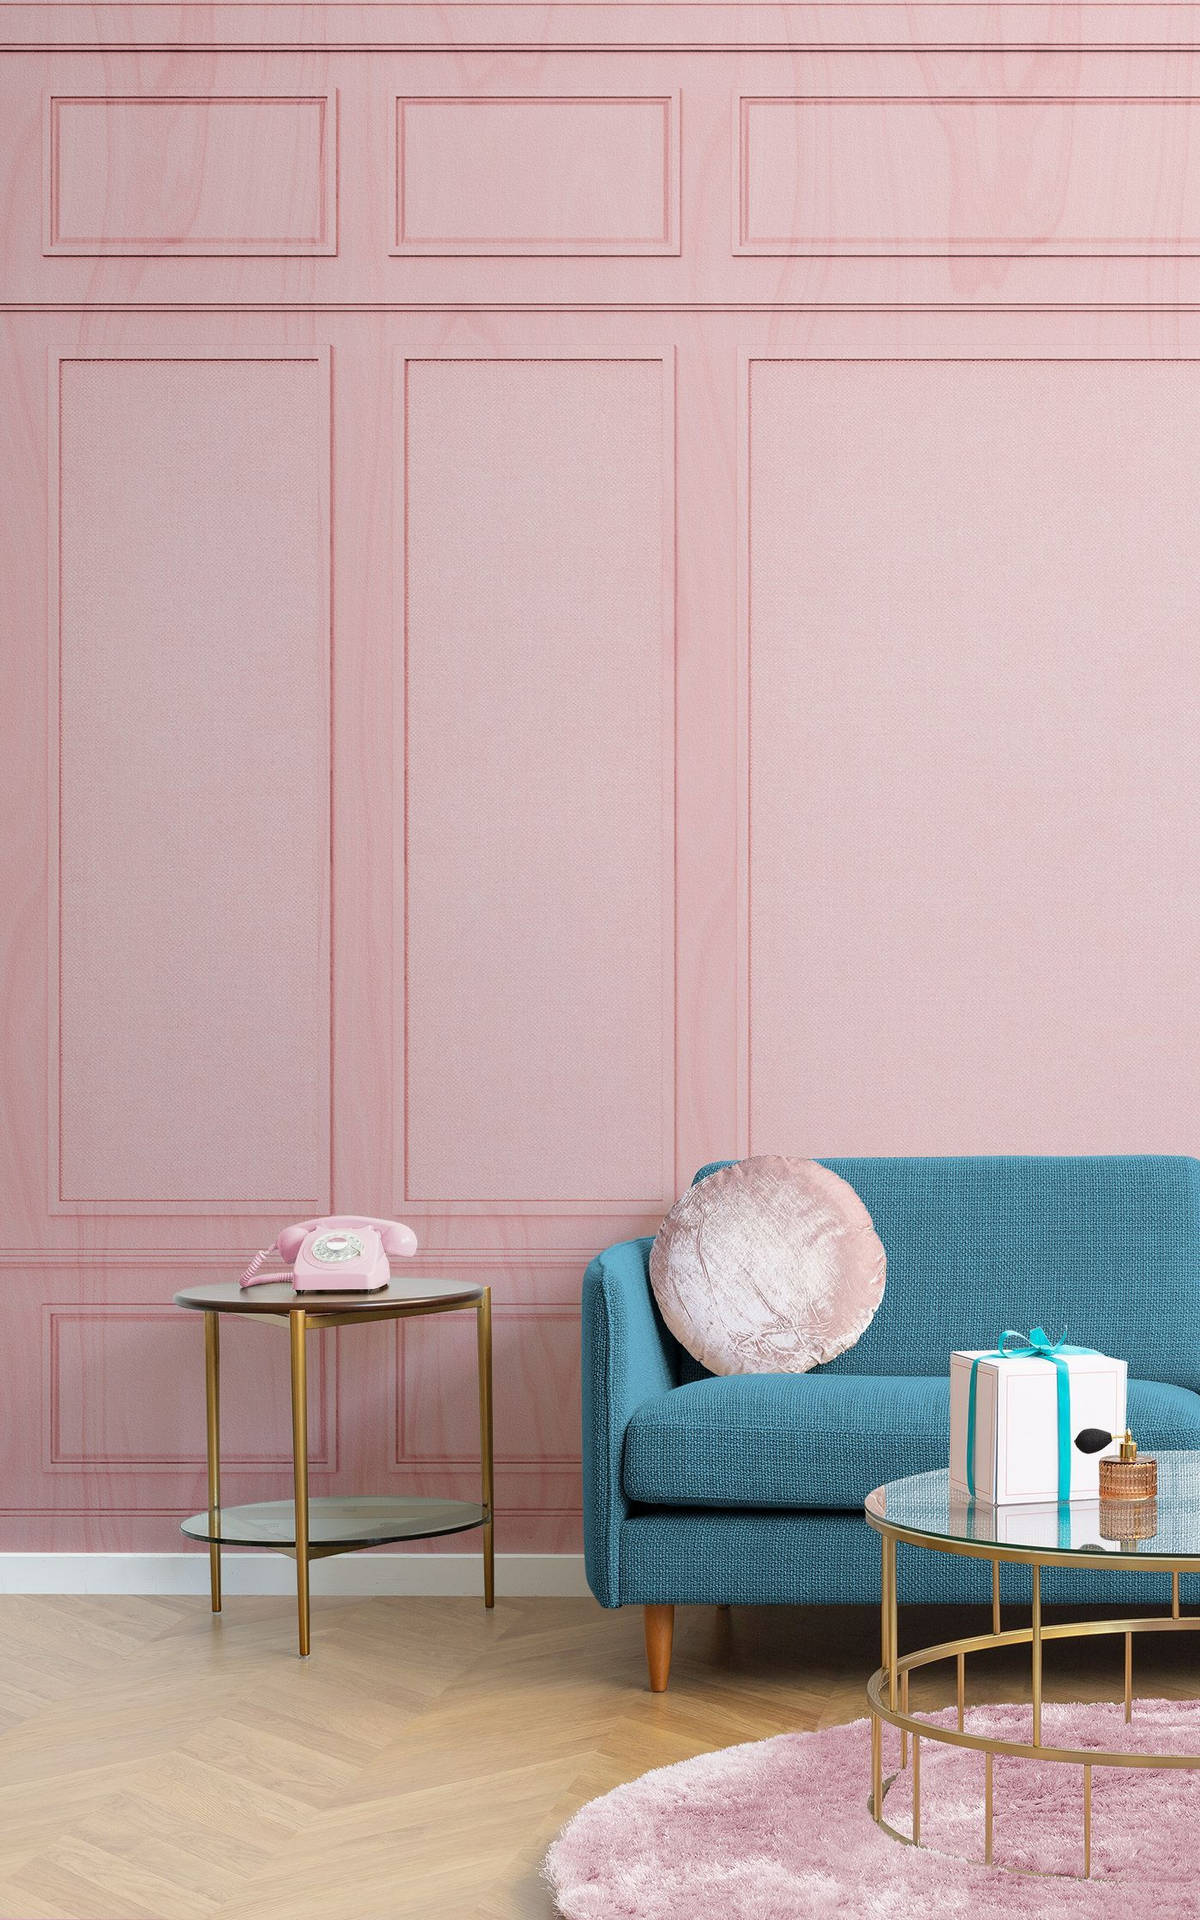 Aesthetic Home Living Room With Pink Wall